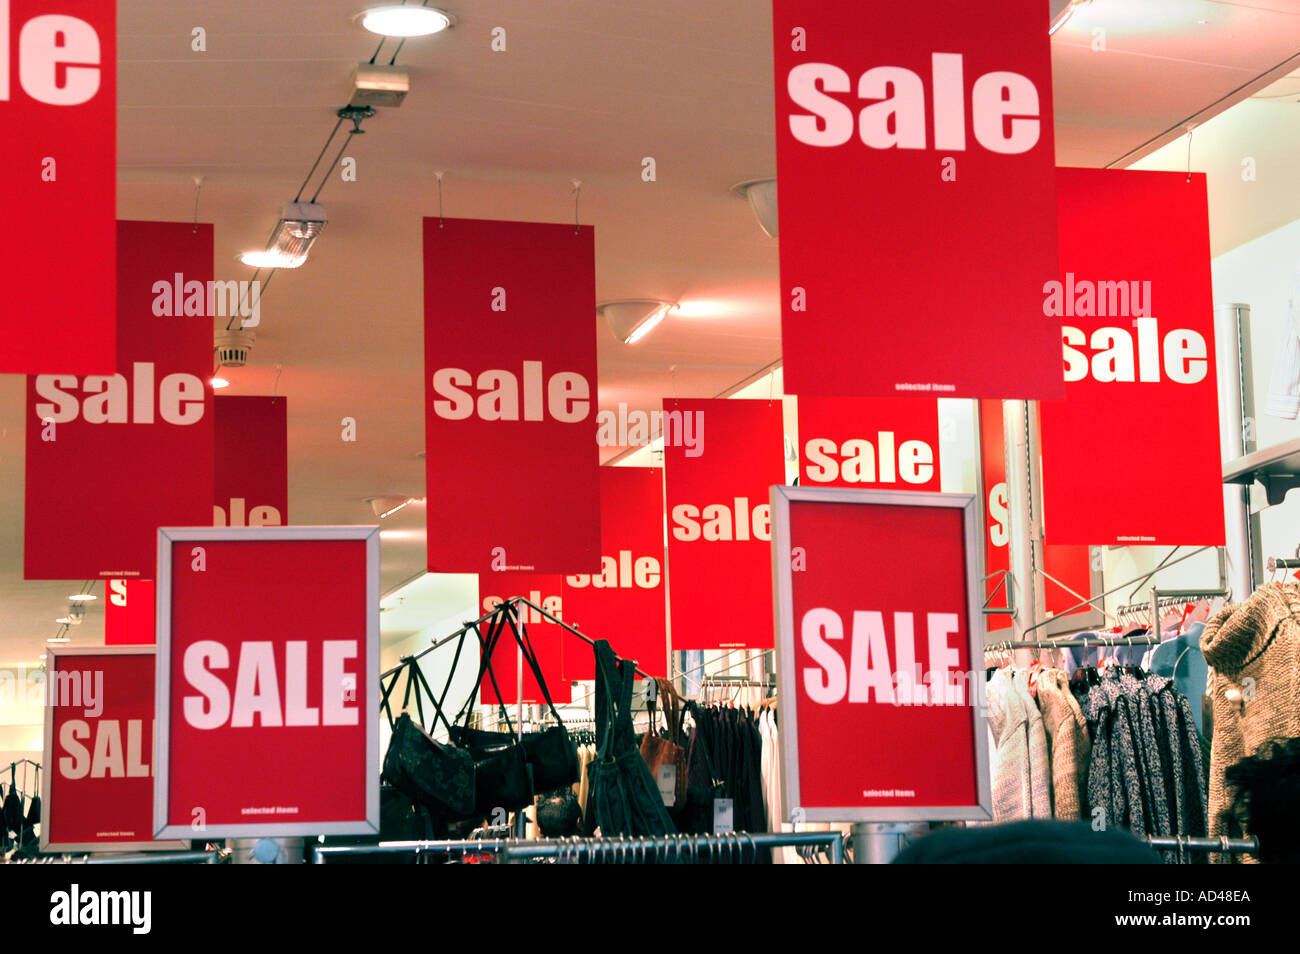 Sale signs in clothes shop London England UK Stock Photo